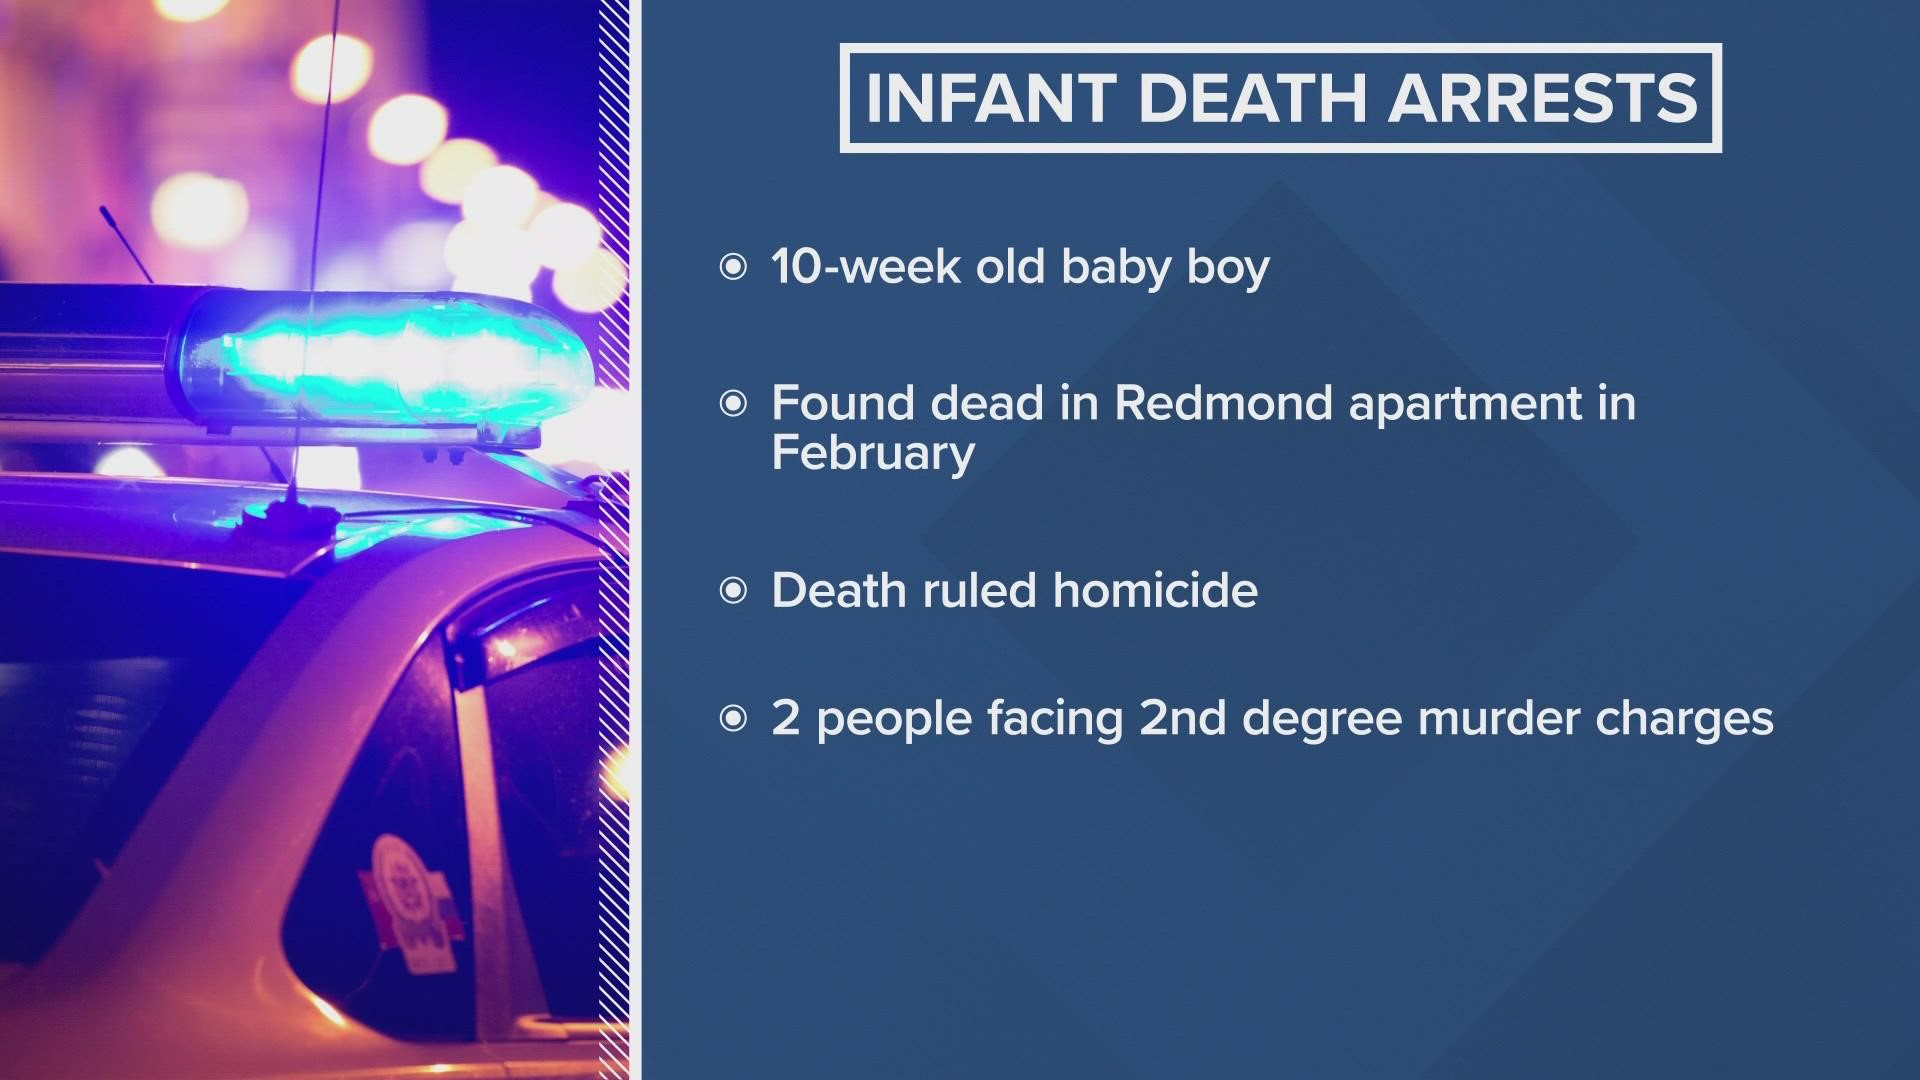 The 10-week old boy was found deceased in his family's apartment. The child was being watched by two adult friends of his mother while she was traveling out of town.